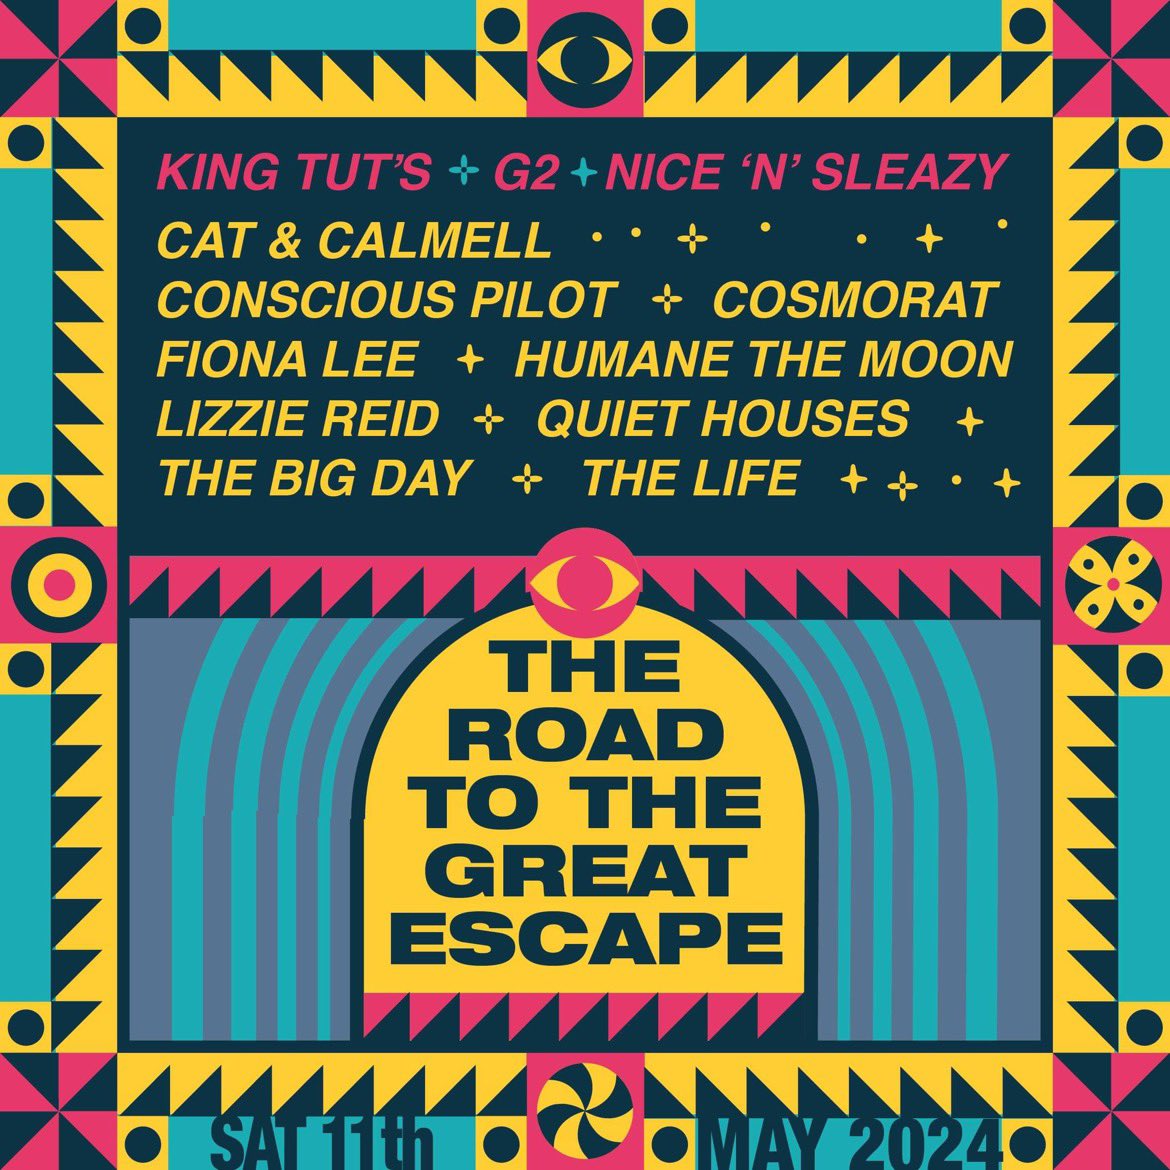 Glesga! We are playing The Road to @thegreatescape in Glasgow alongside some other local legends, Saturday the 11th of May. Tickets are on sale tomorrow at 10am 💫